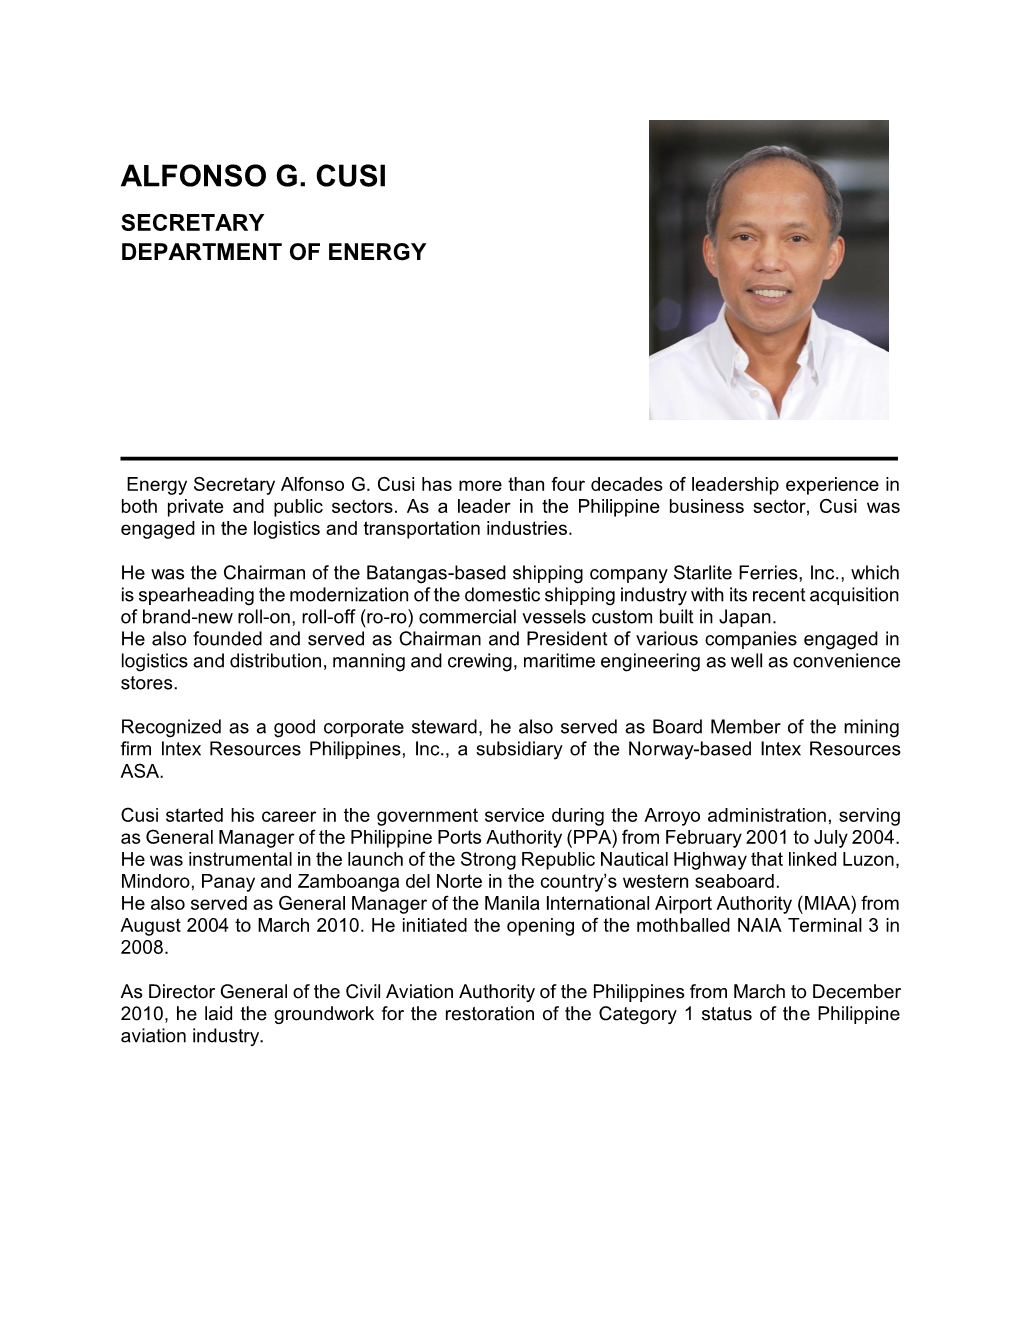 Secretary Alfonso G. Cusi Has More Than Four Decades of Leadership Experience in Both Private and Public Sectors